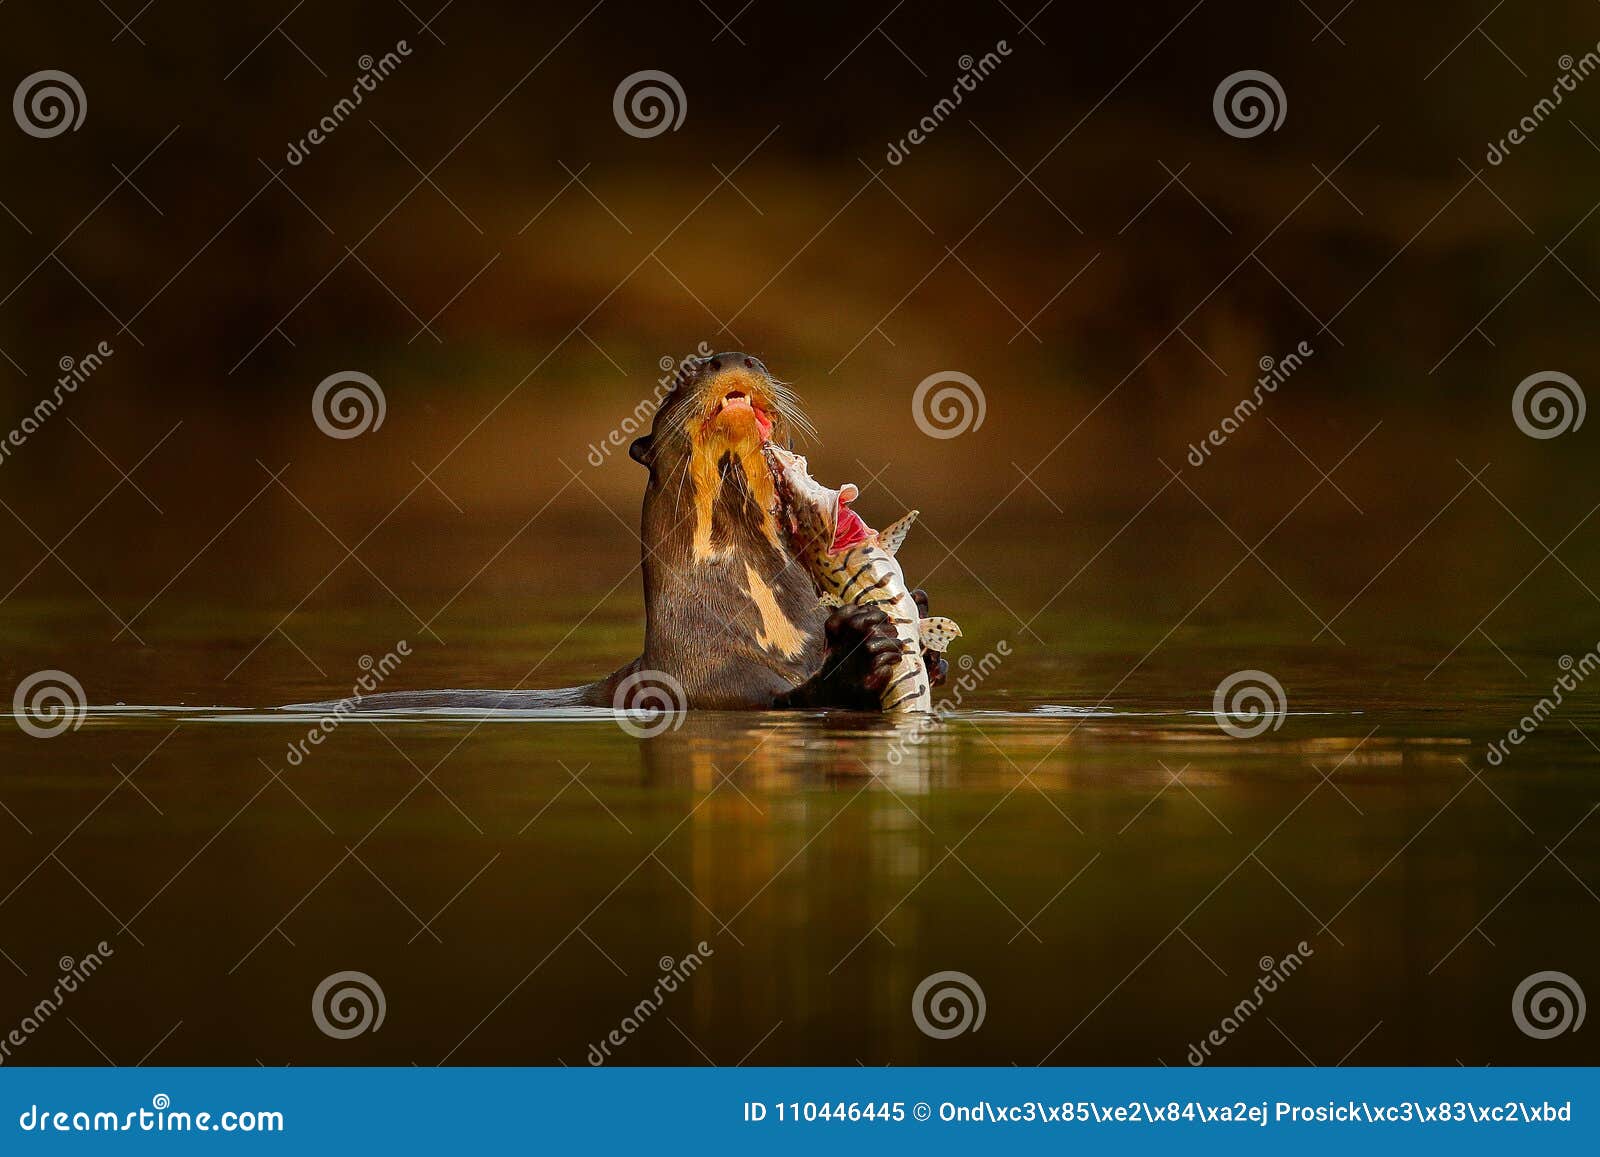 otter with catch fish. giant otter, pteronura brasiliensis, portrait in the river water level, rio negro, pantanal, brazil. wildli